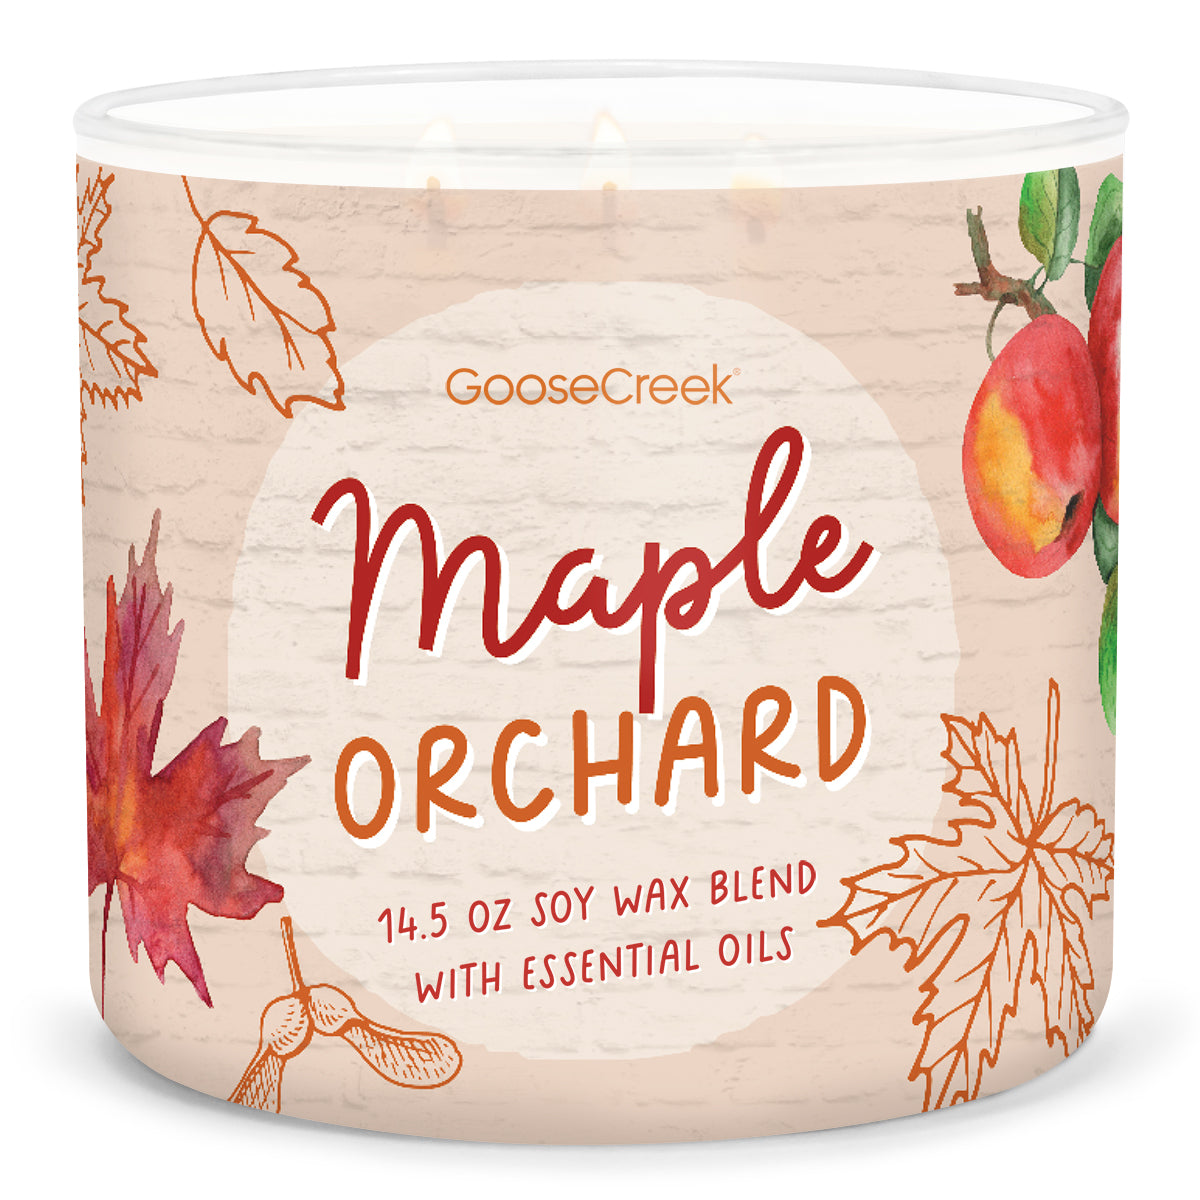 Maple Orchard Large 3-Wick Candle